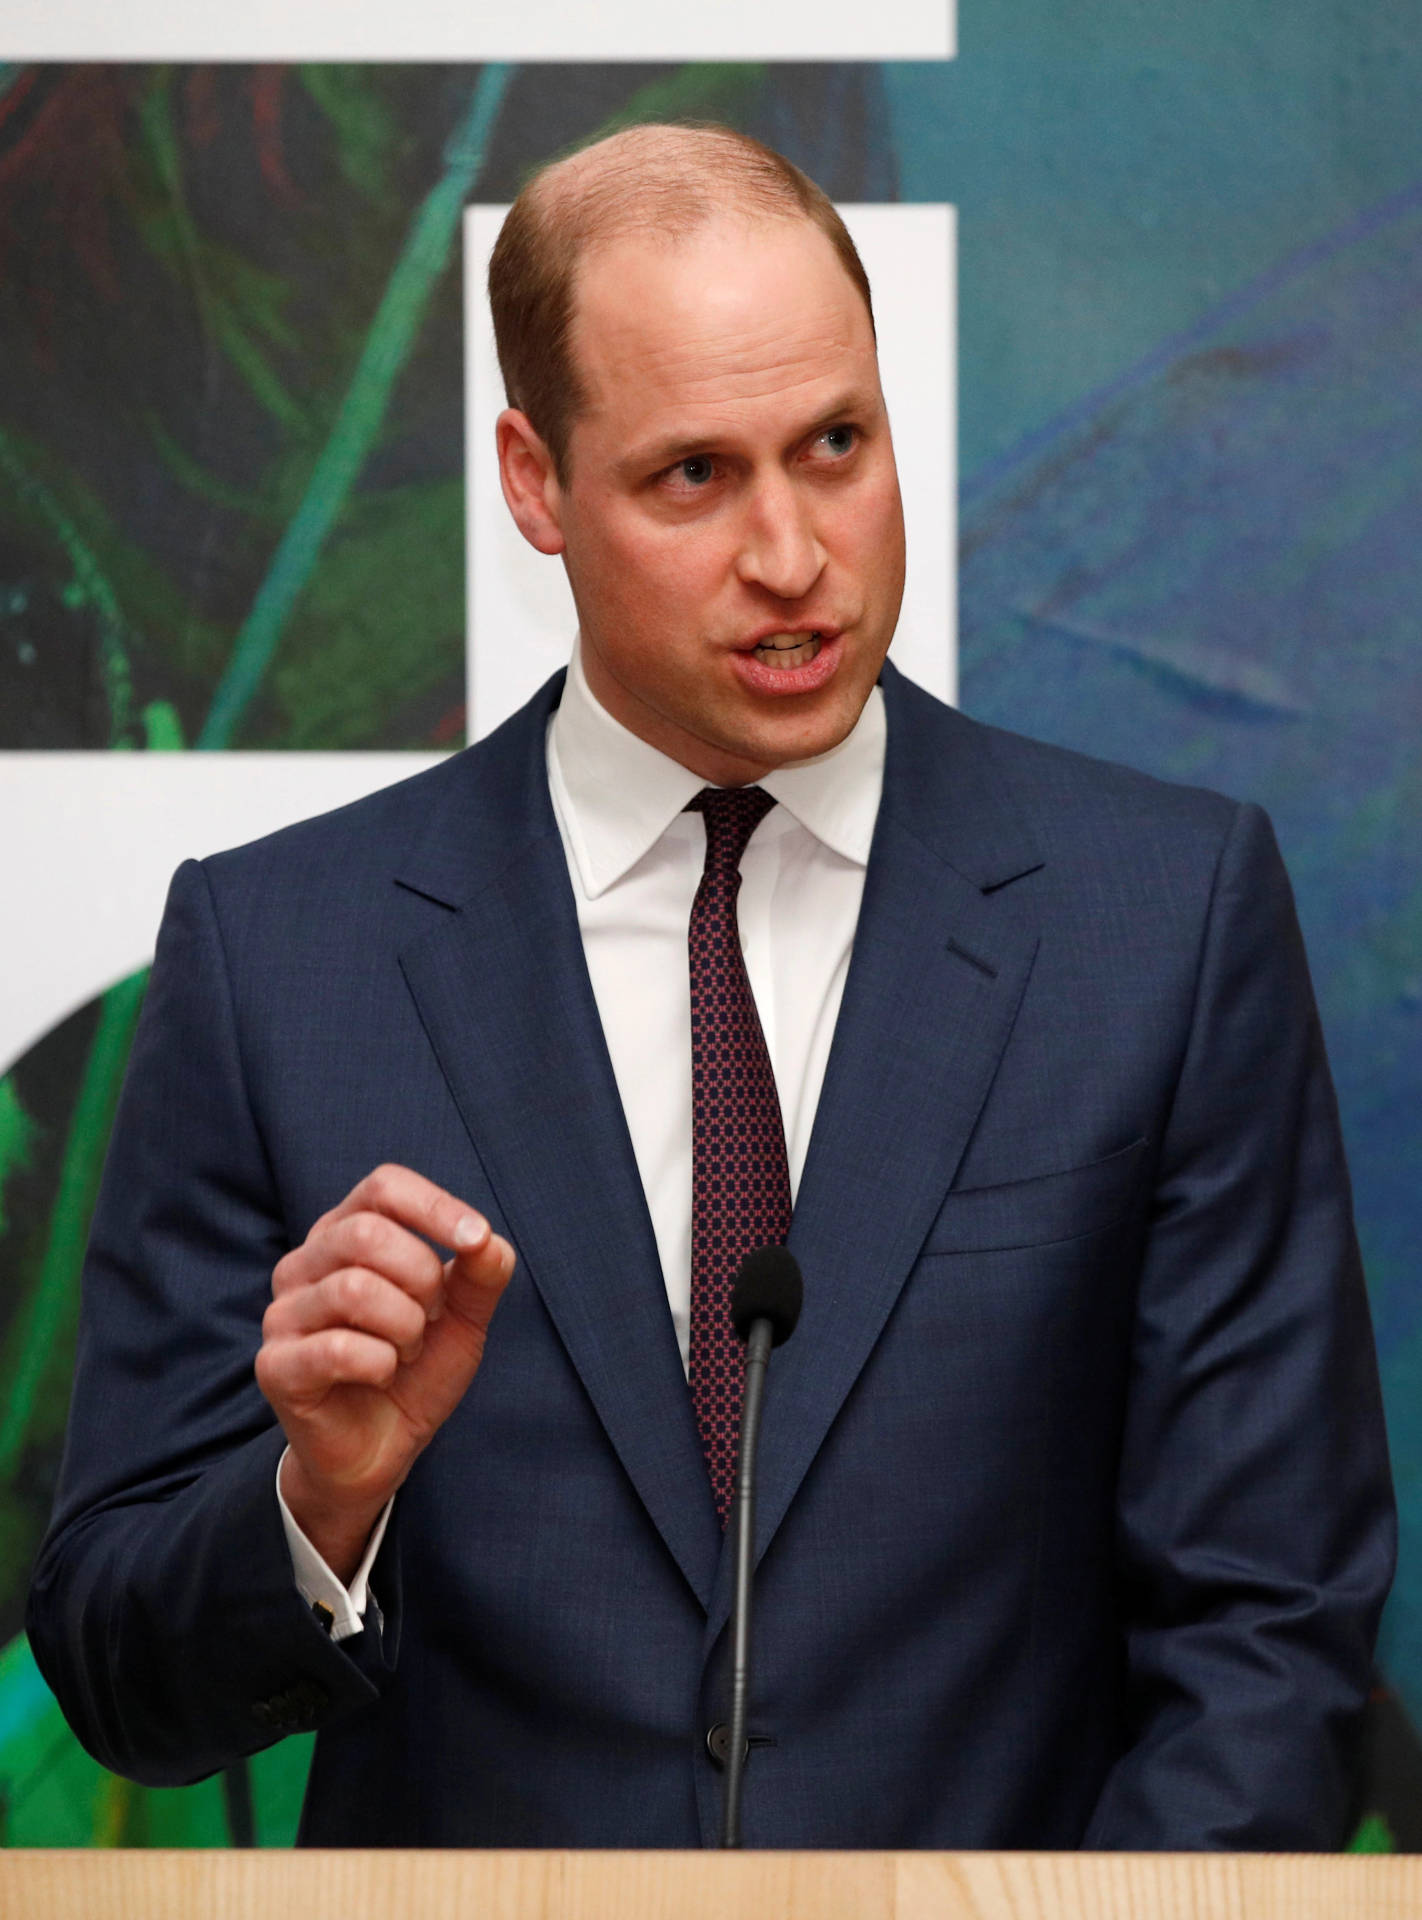 Prince William Addressing An Audience.